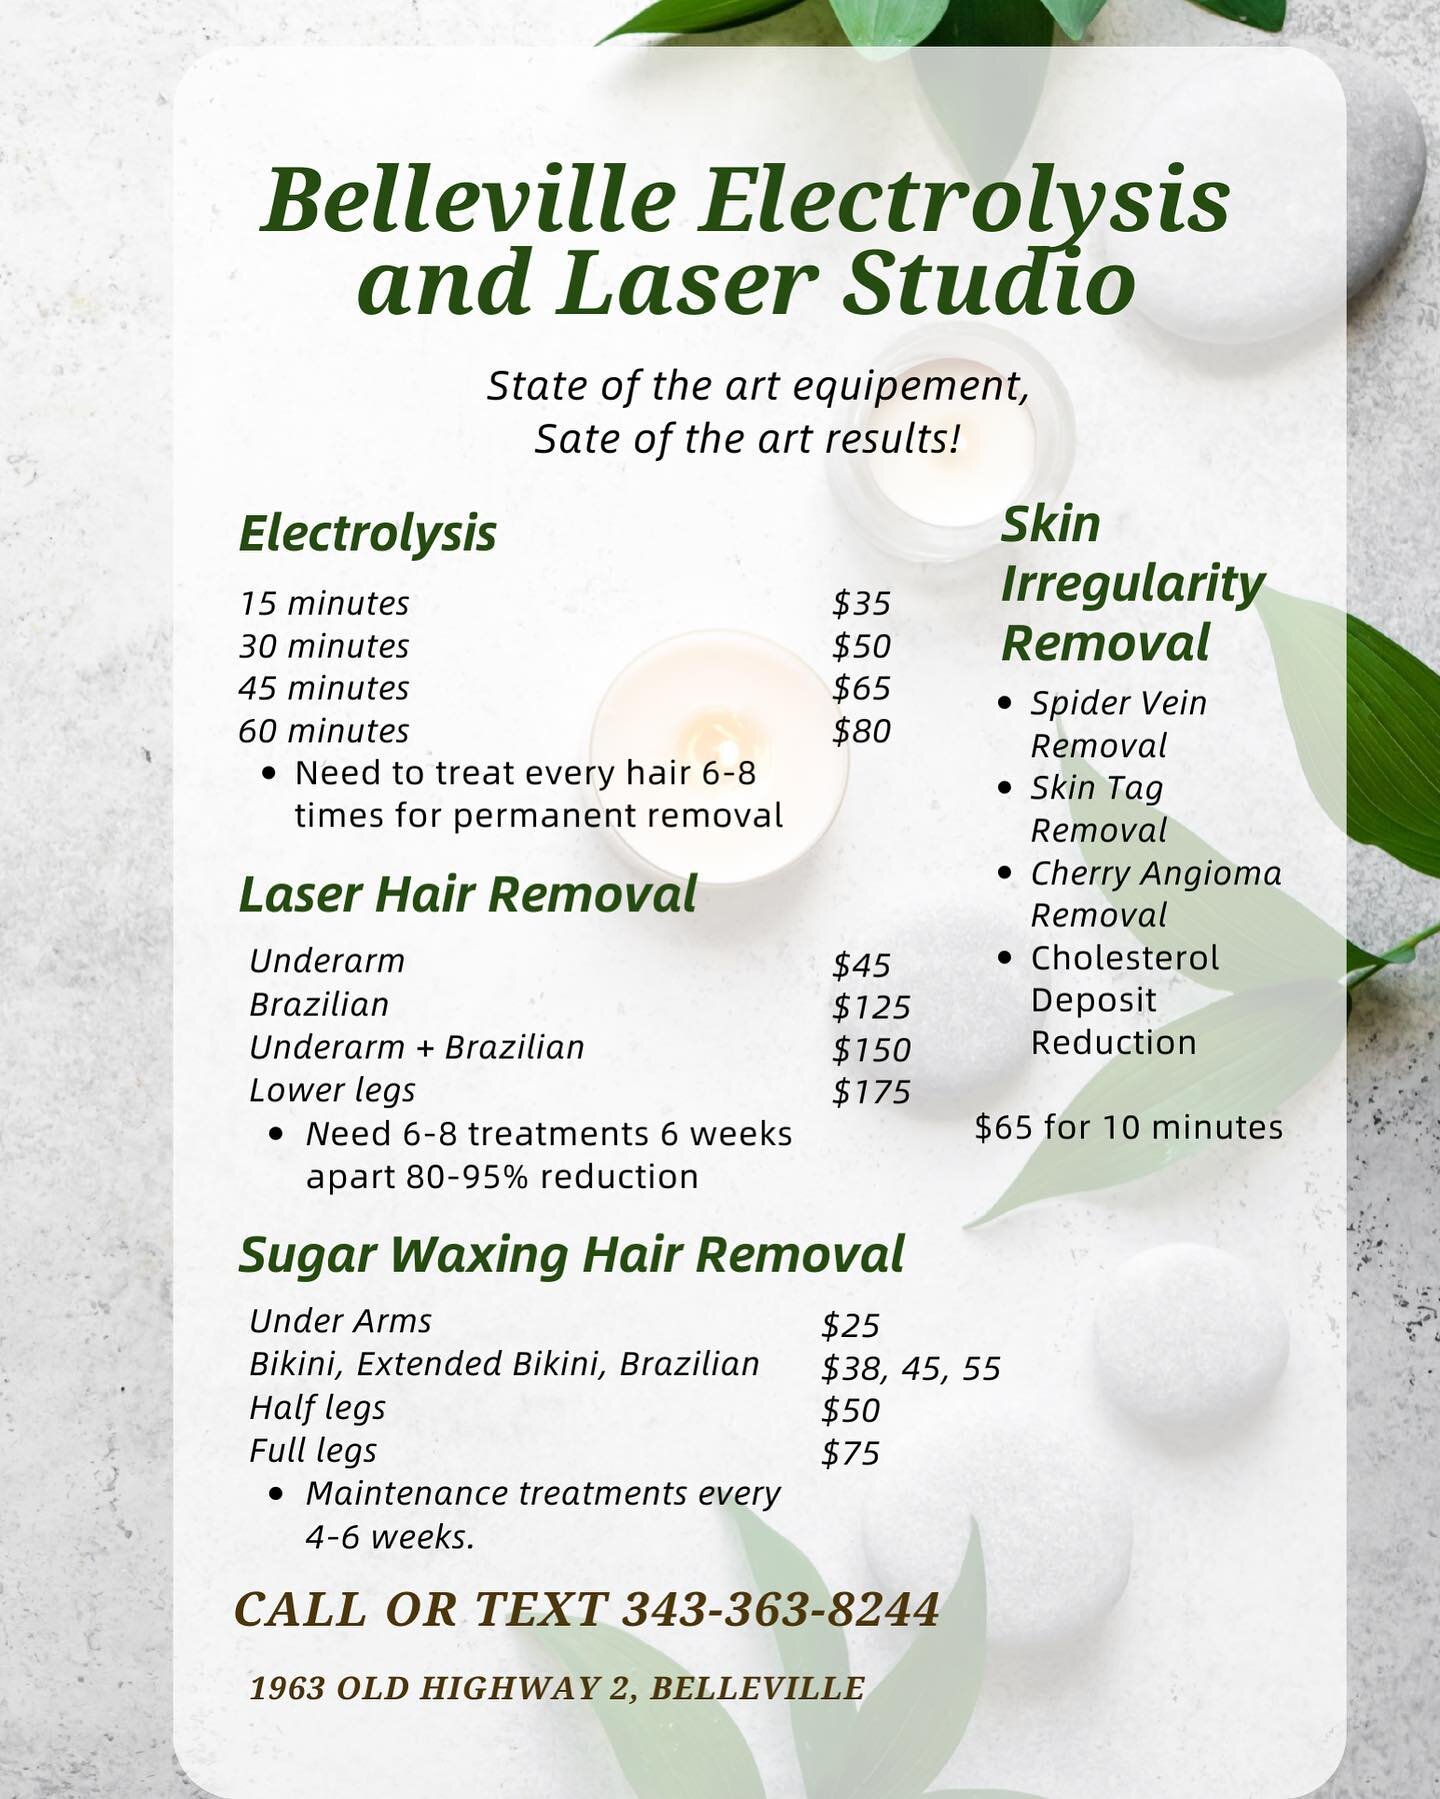 @belleville.electrolysis.laser We are offering temporary - permanent hair removal with Laser, Electrolysis, and Sugar Waxing. We also offer Skin irregularity treatments for skin tags, spider veins, cherry angiomas, and cholesterol deposits. Call or t